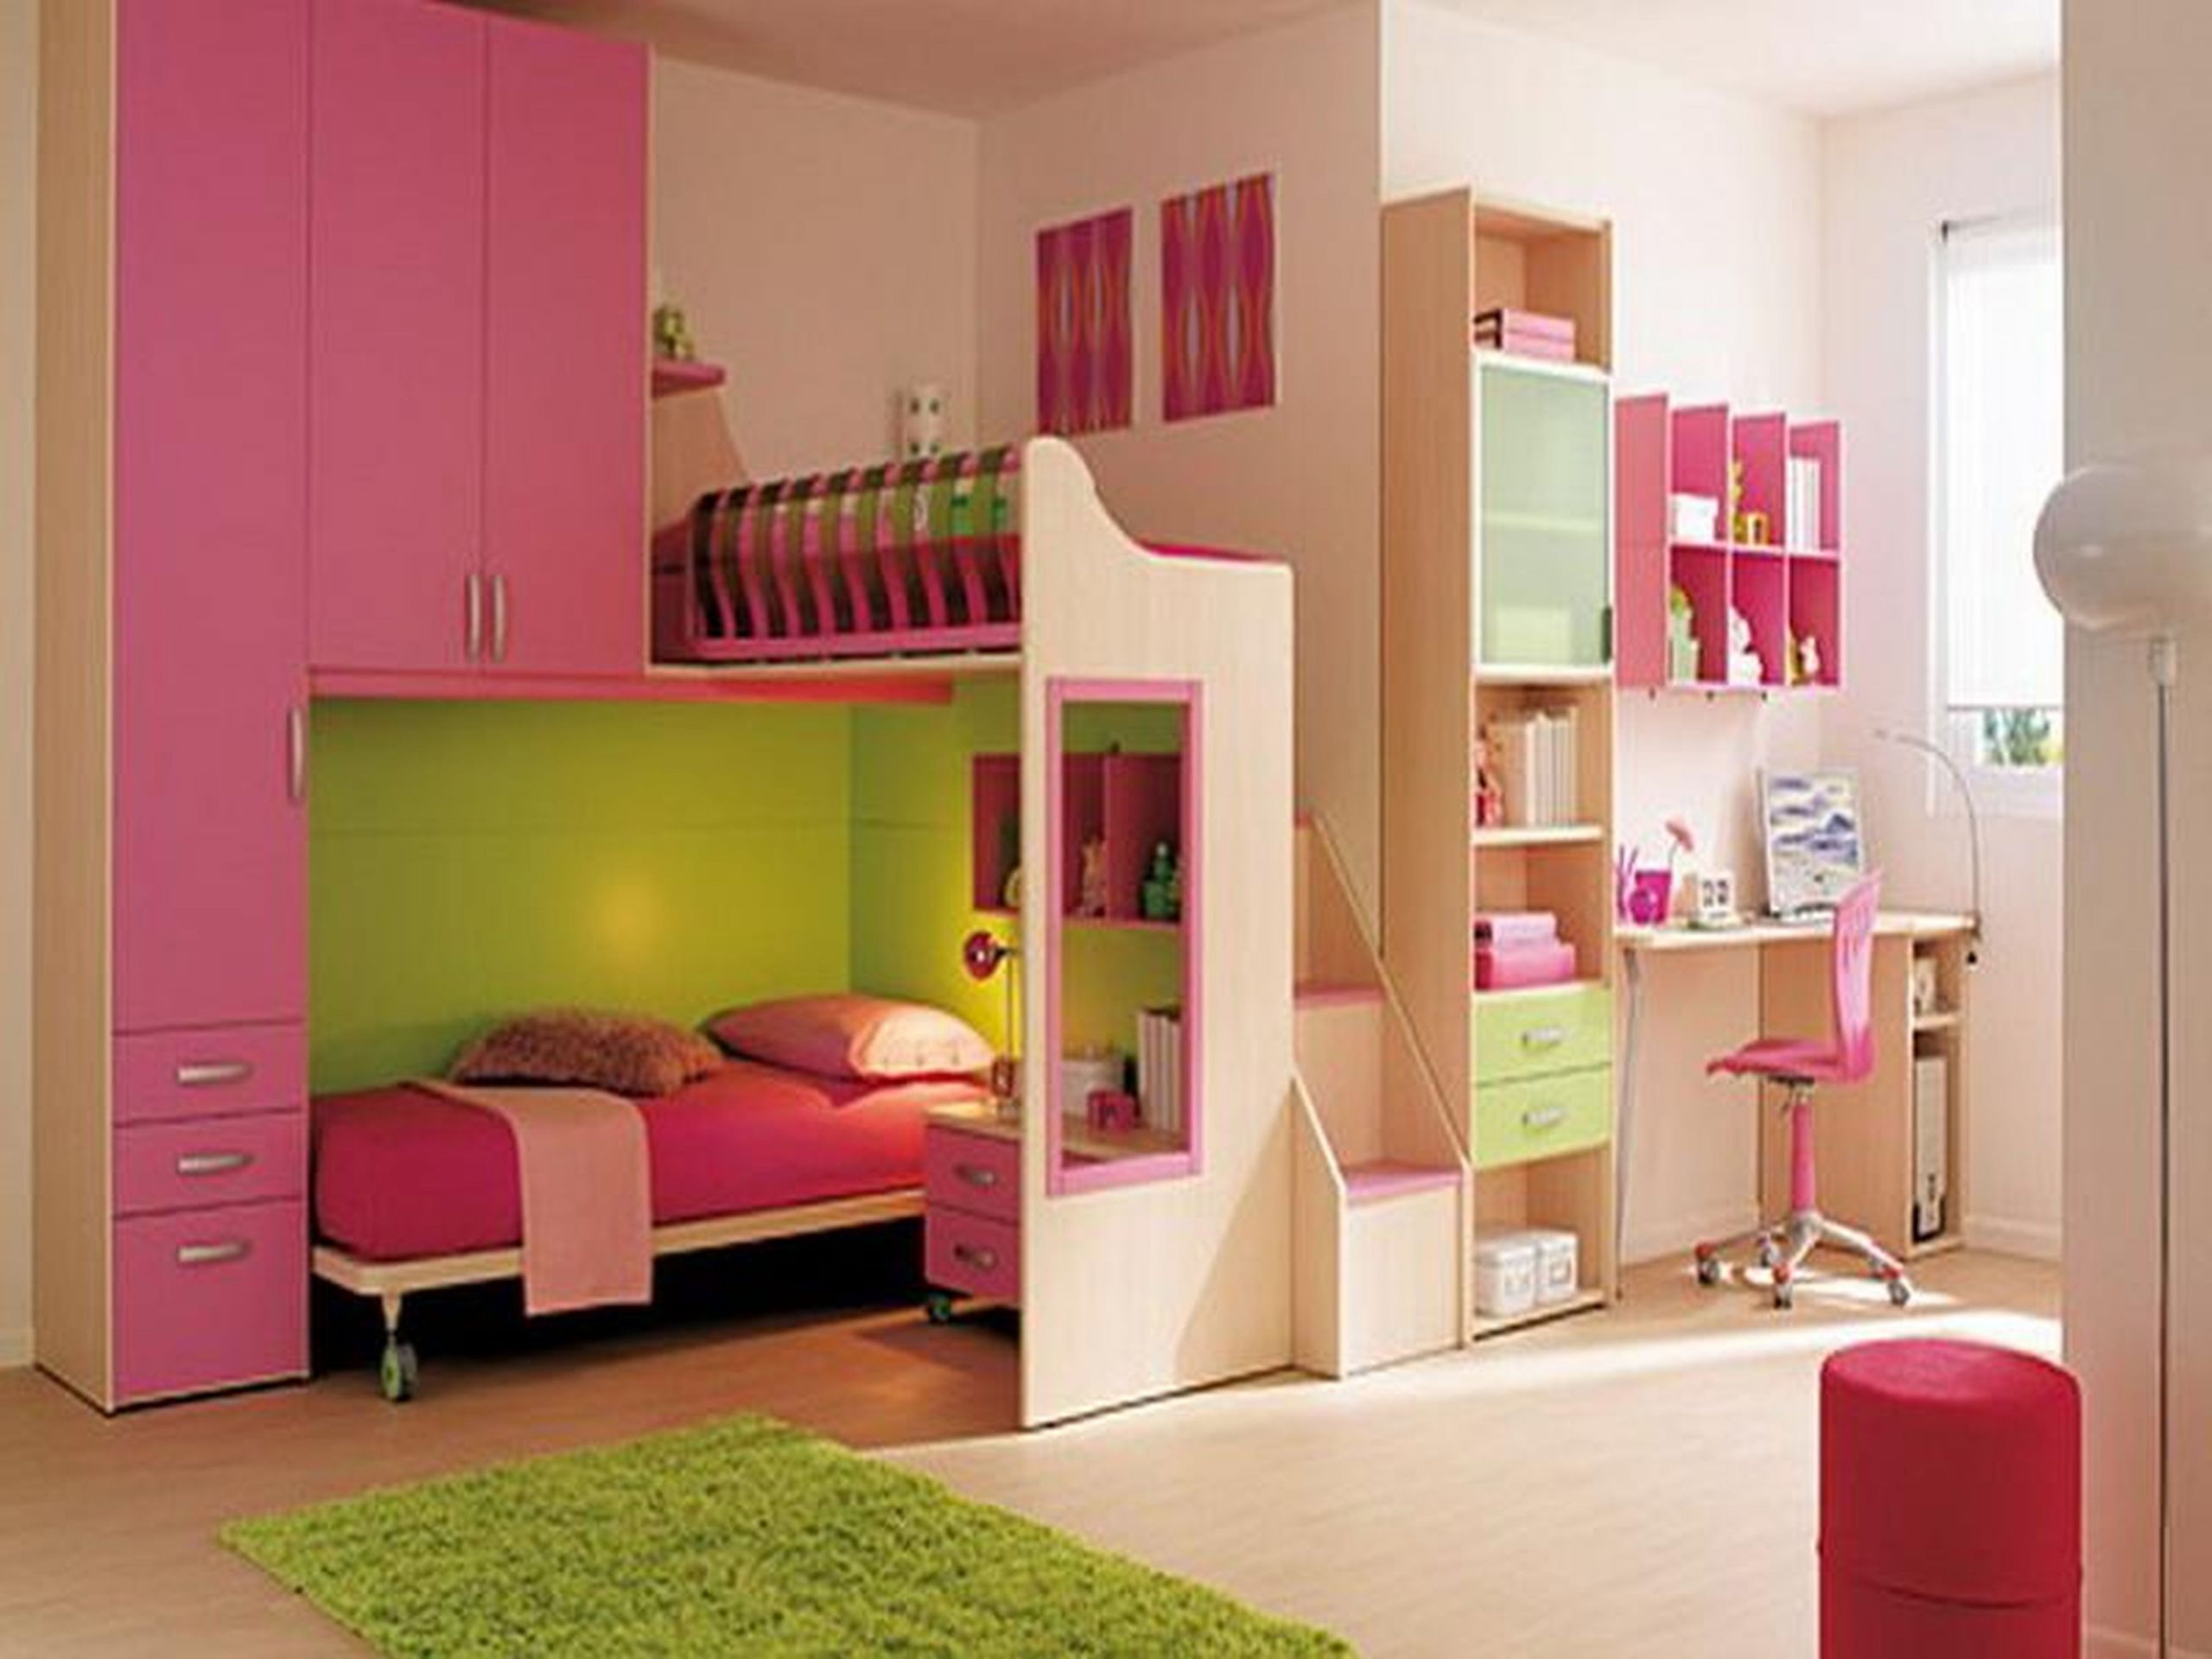 Storage Ideas For Kids Rooms
 DIY Storage Ideas For Kids Room Crafts To Do With Kids